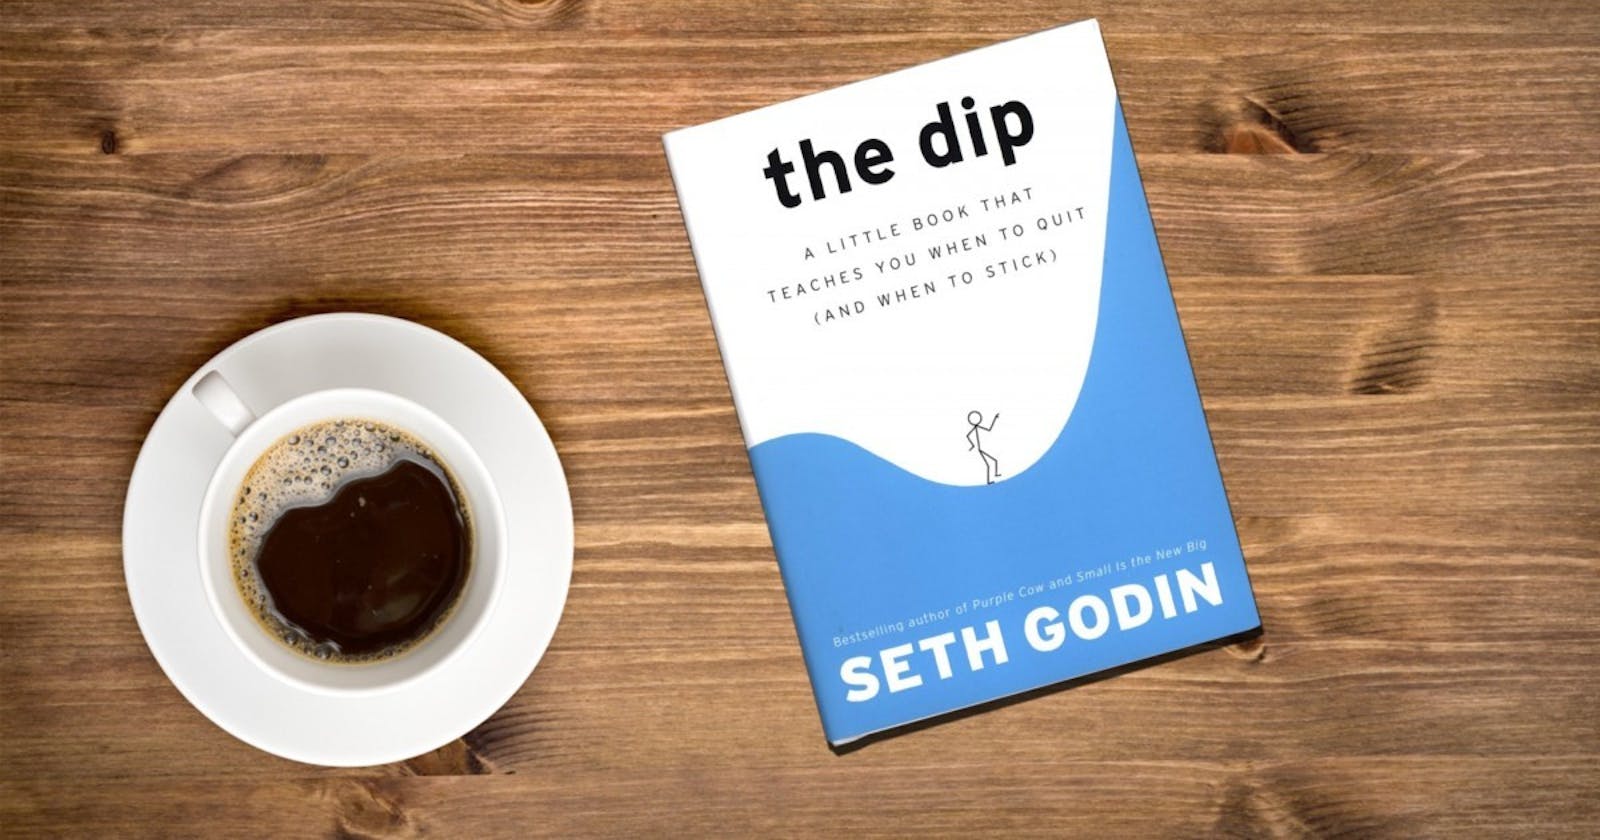 The Dip: A little book that teaches you when to quit and when to stick